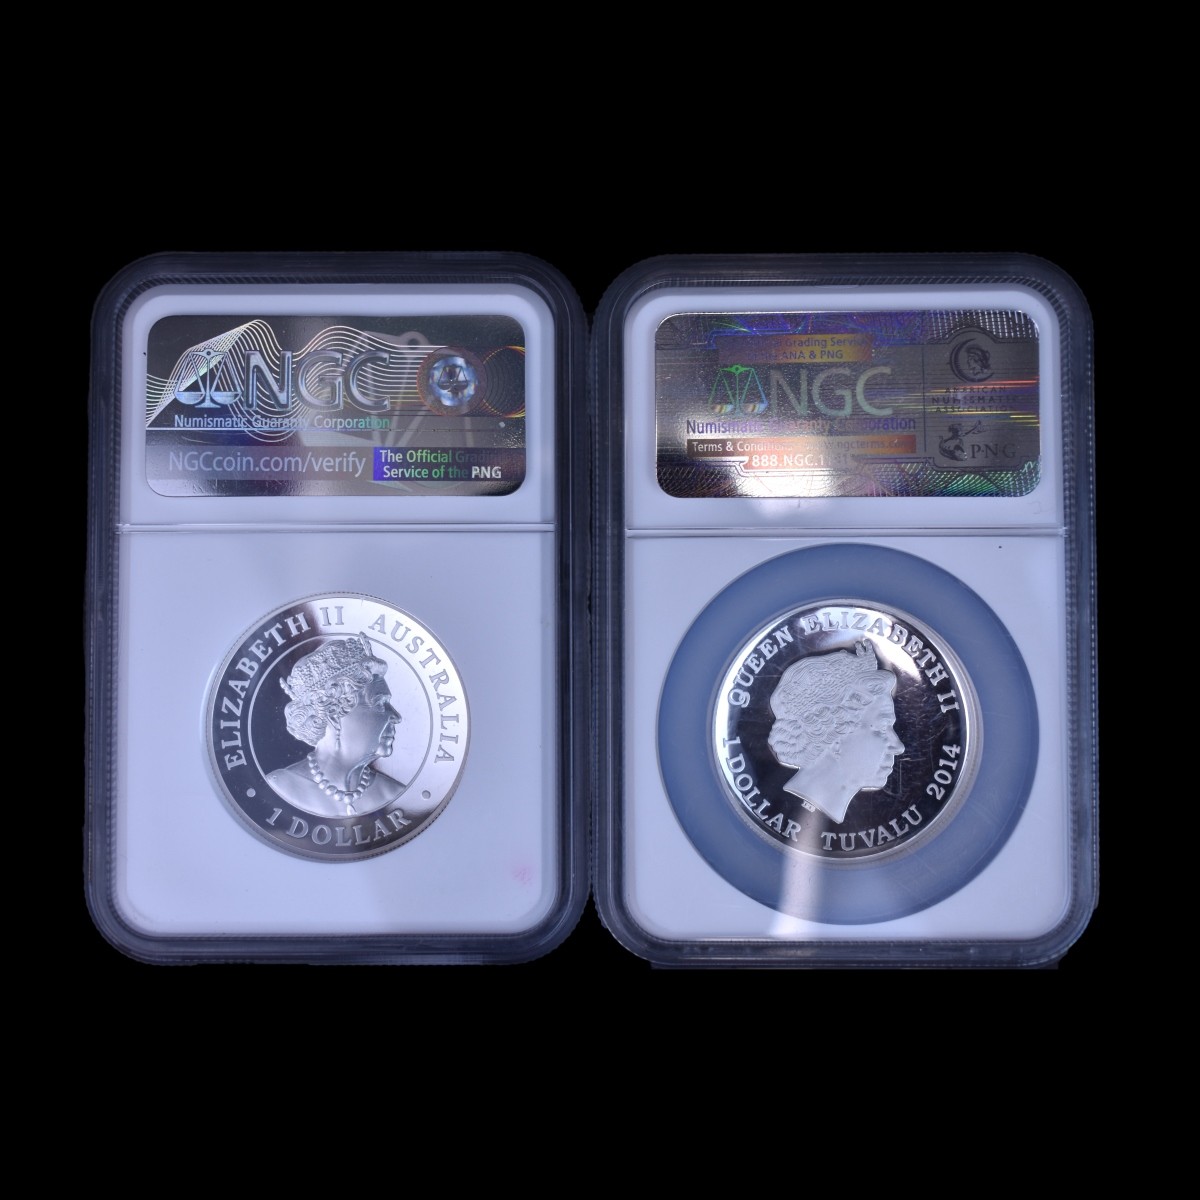 Two 1 Oz. Silver Slabbed Coins